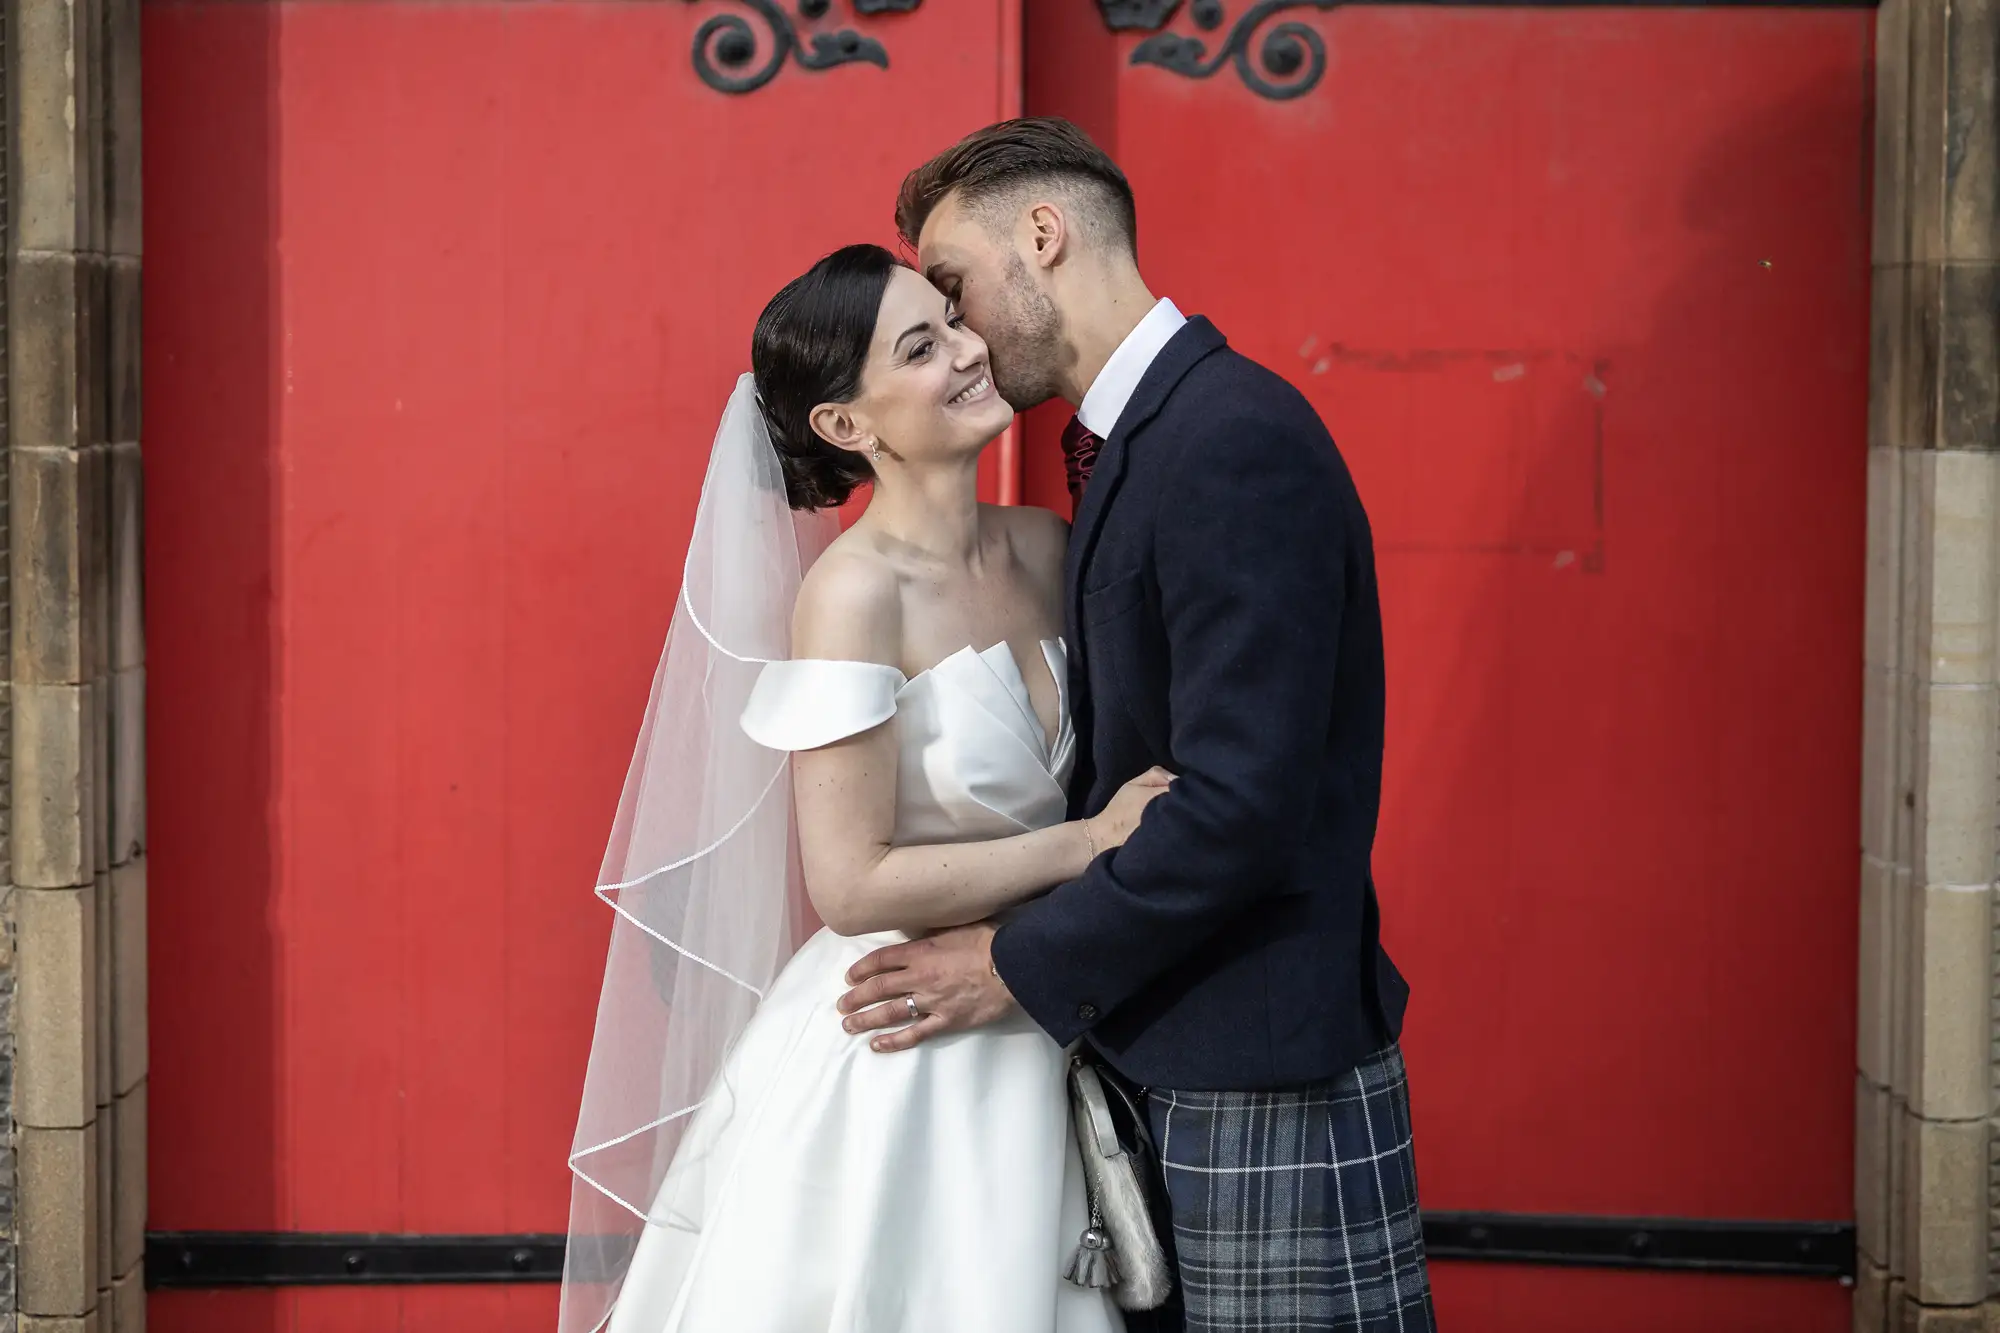 Bride and groom sharing a tender moment in front of a bright red door, with the groom wearing a kilt and the bride in a white dress and veil.